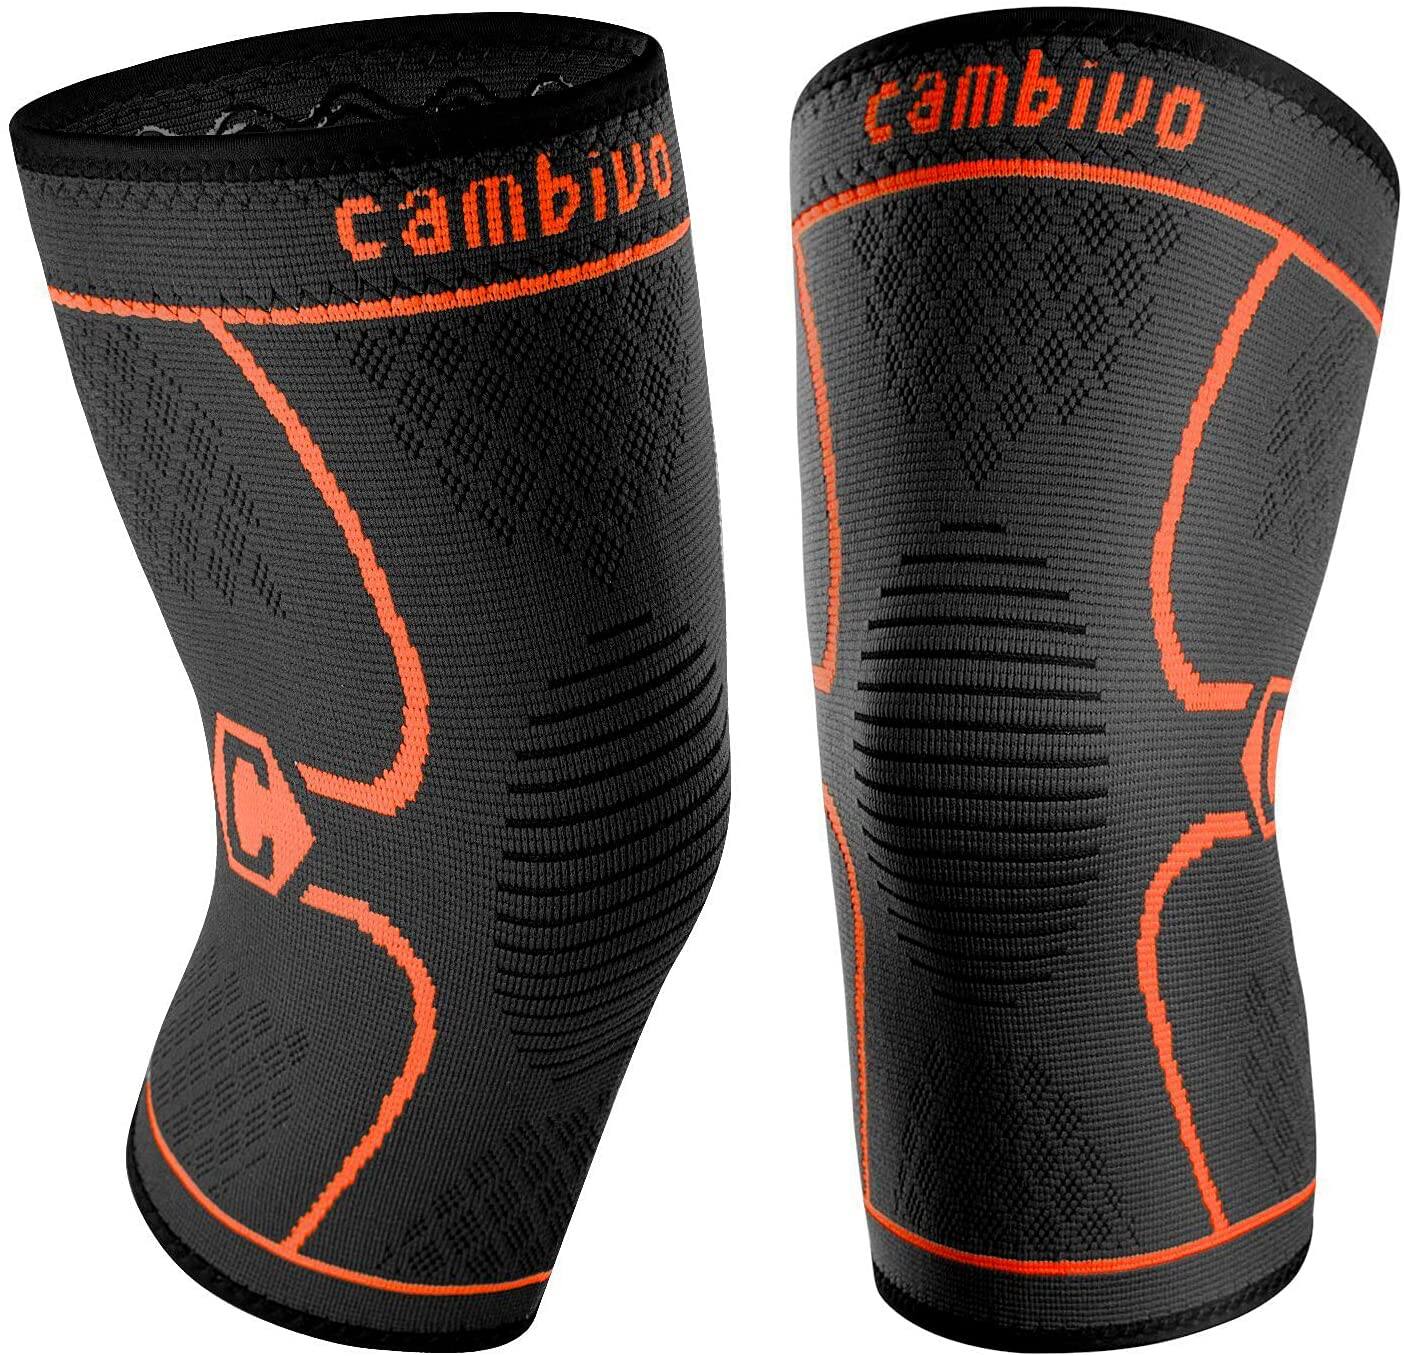 2 Pack CAMBIVO Compression Knee Sleeve for $7.99 (6 Colors) + Free Shipping w/ Prime or orders $25+